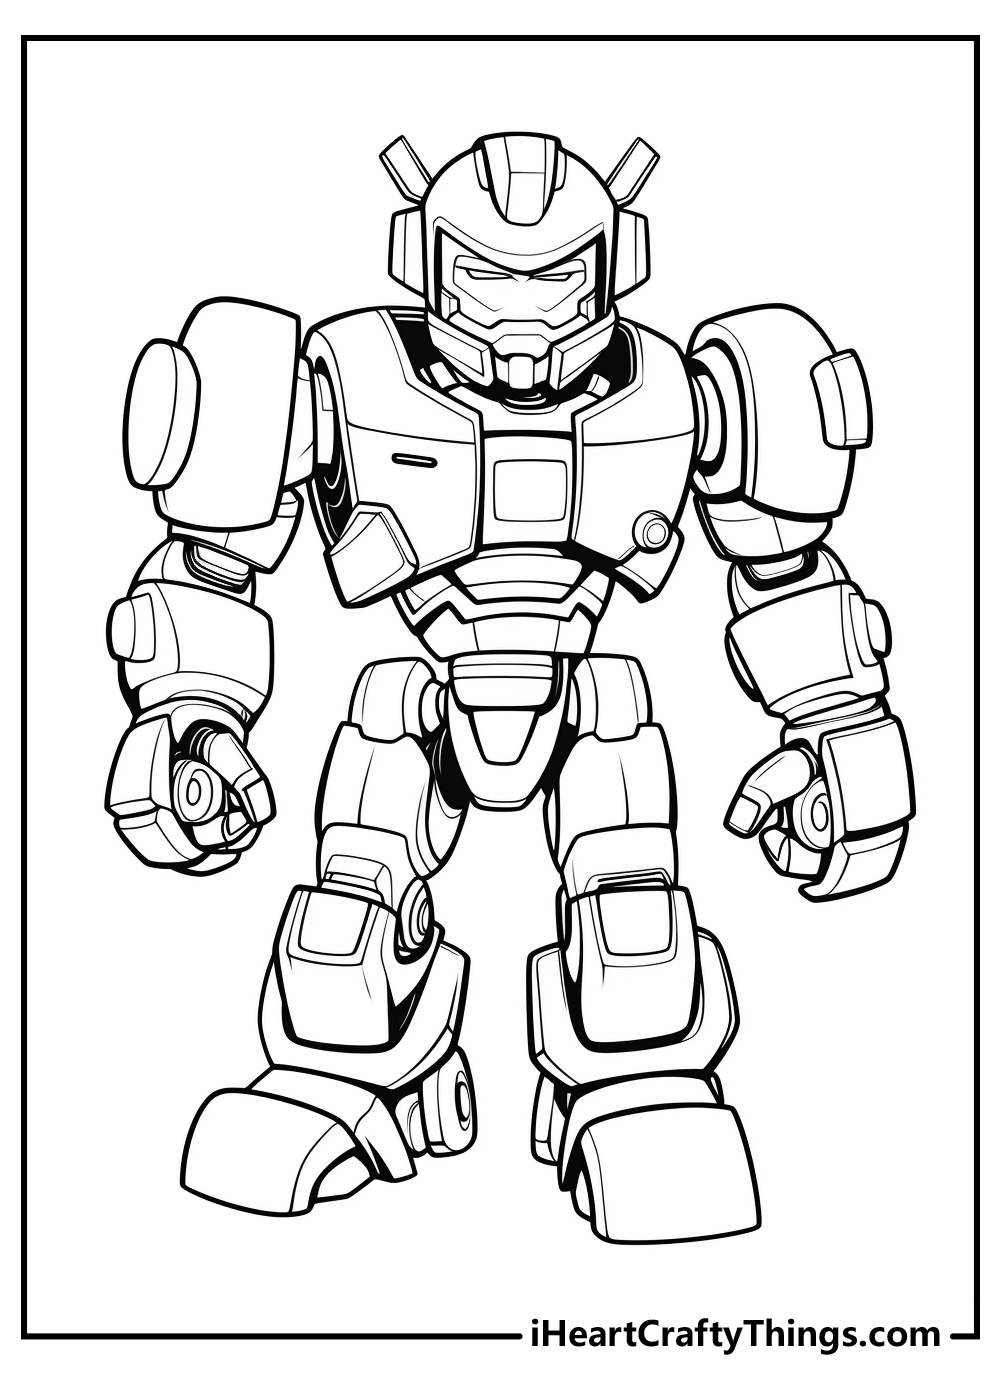 new Bumblebee coloring sheet for kids